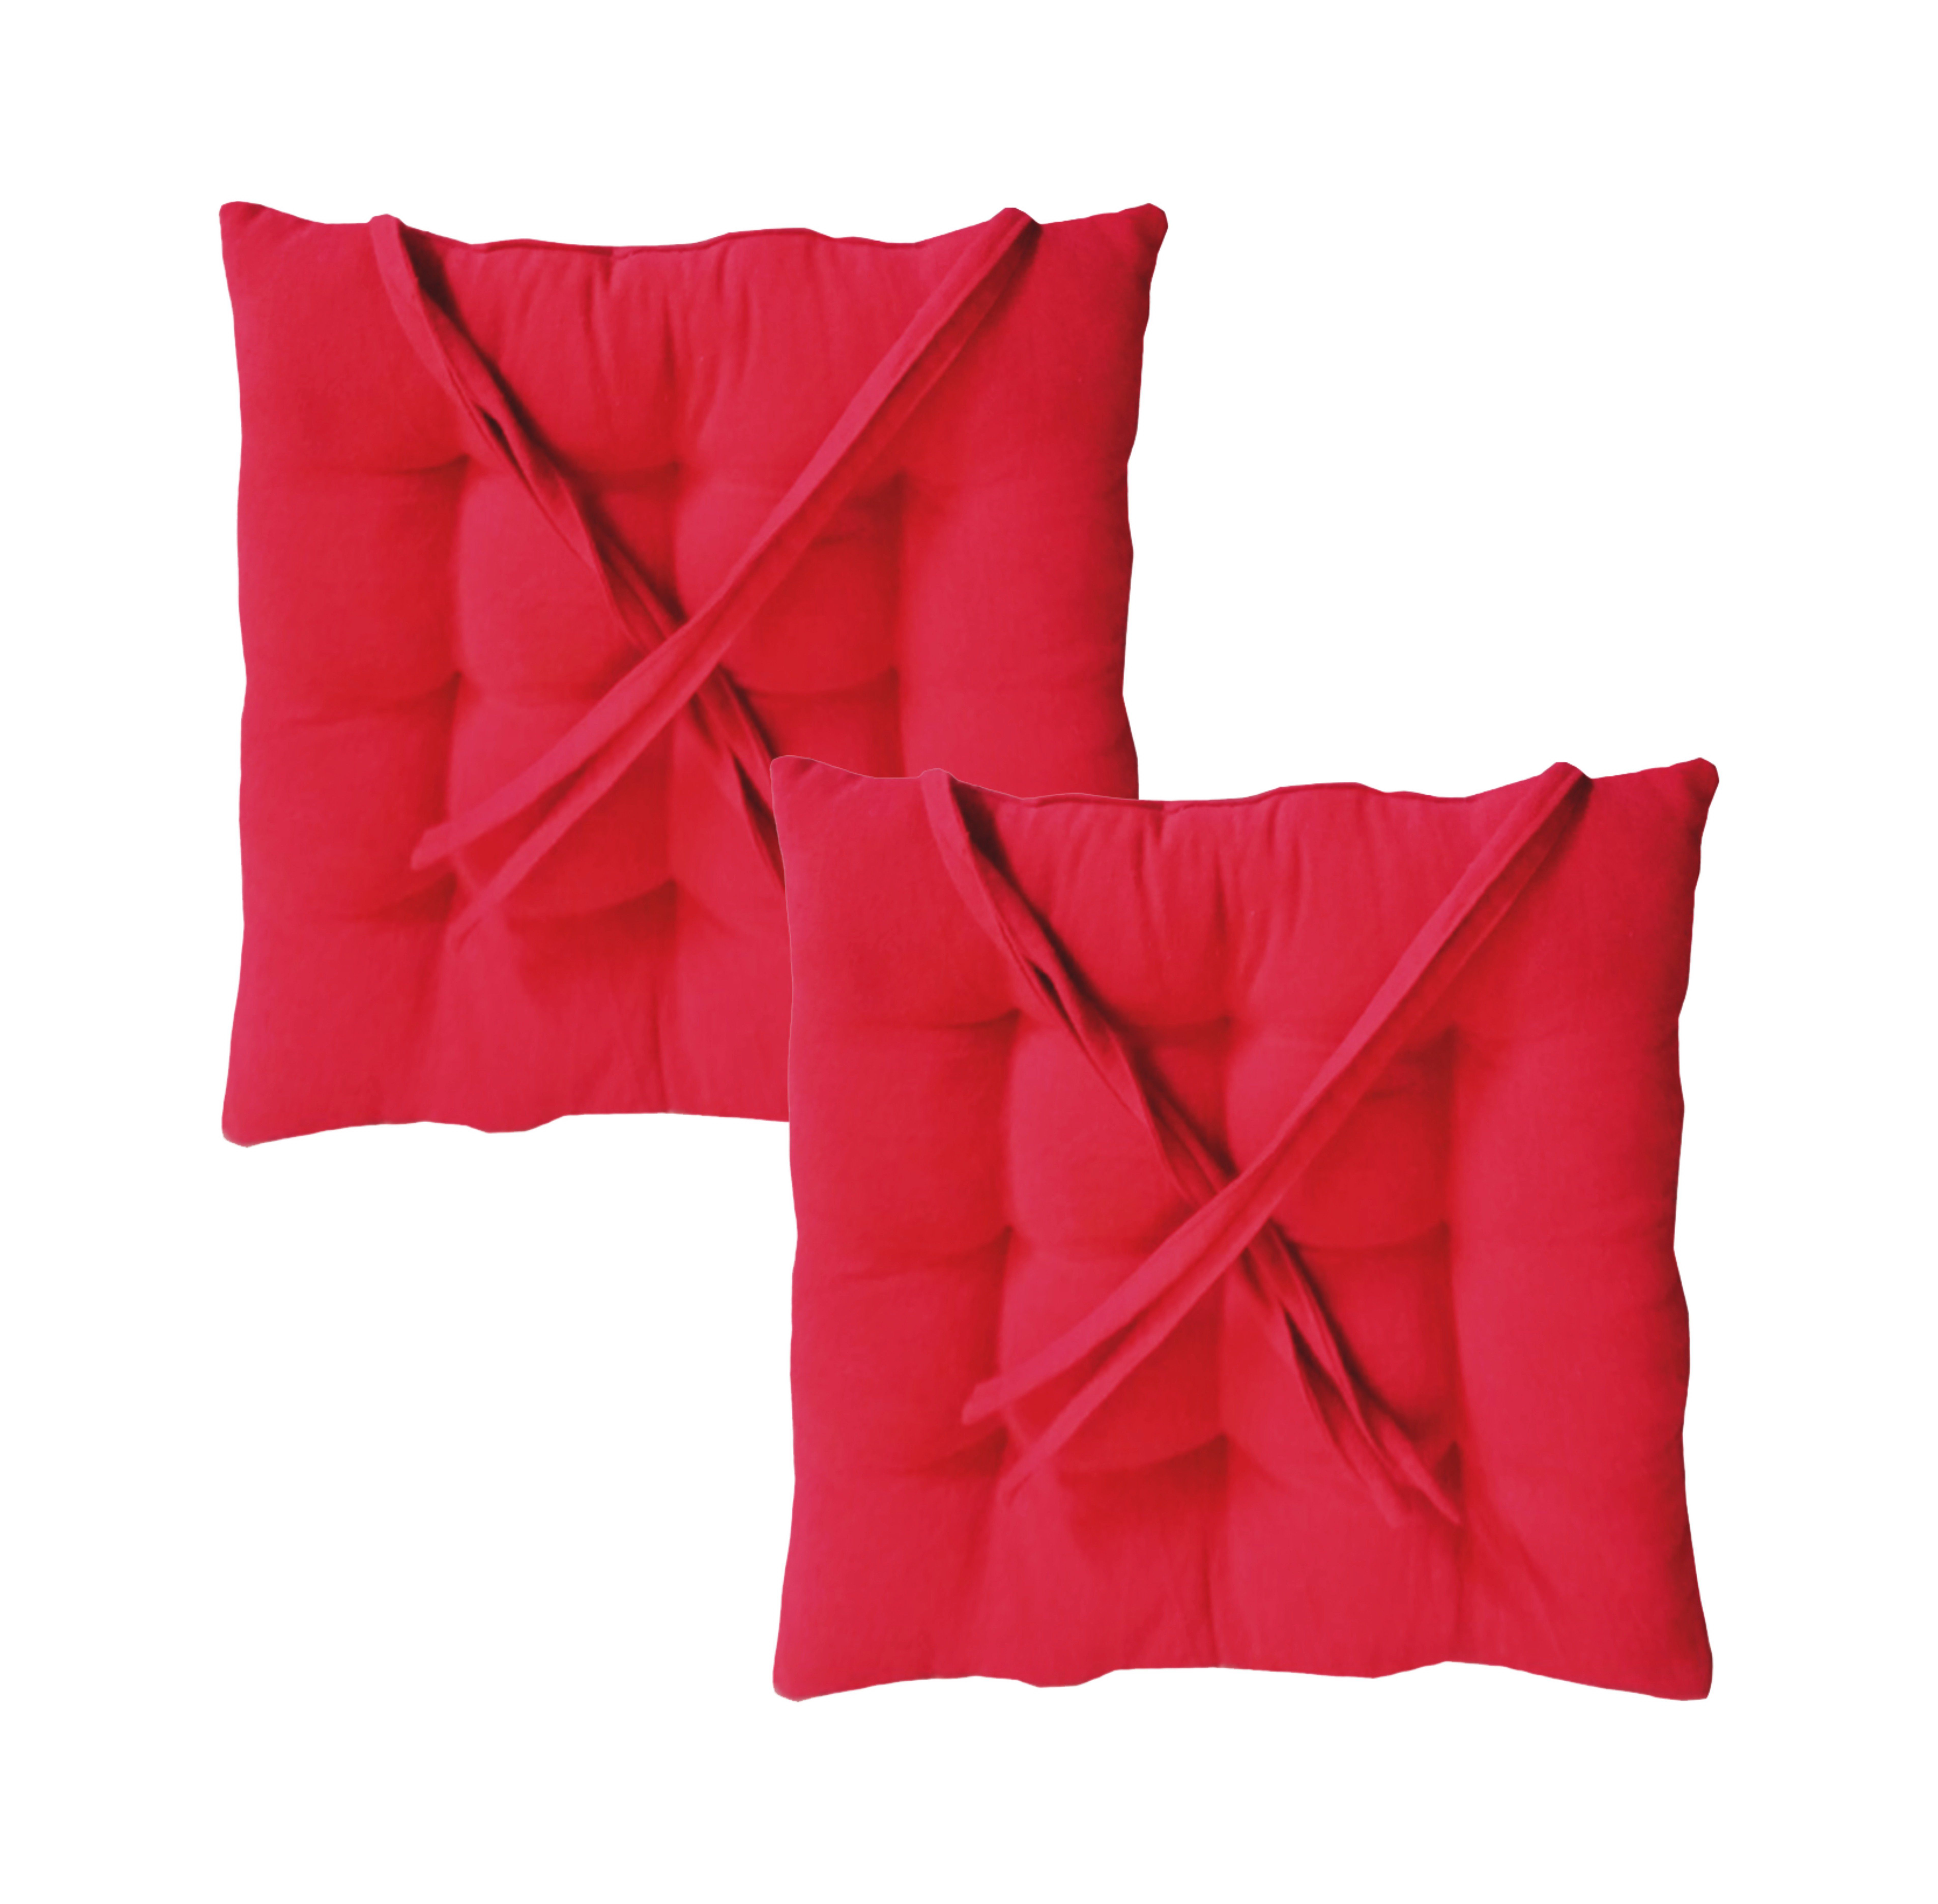     			SBN New Life Style Set of 2 Red Cotton Chair Pads